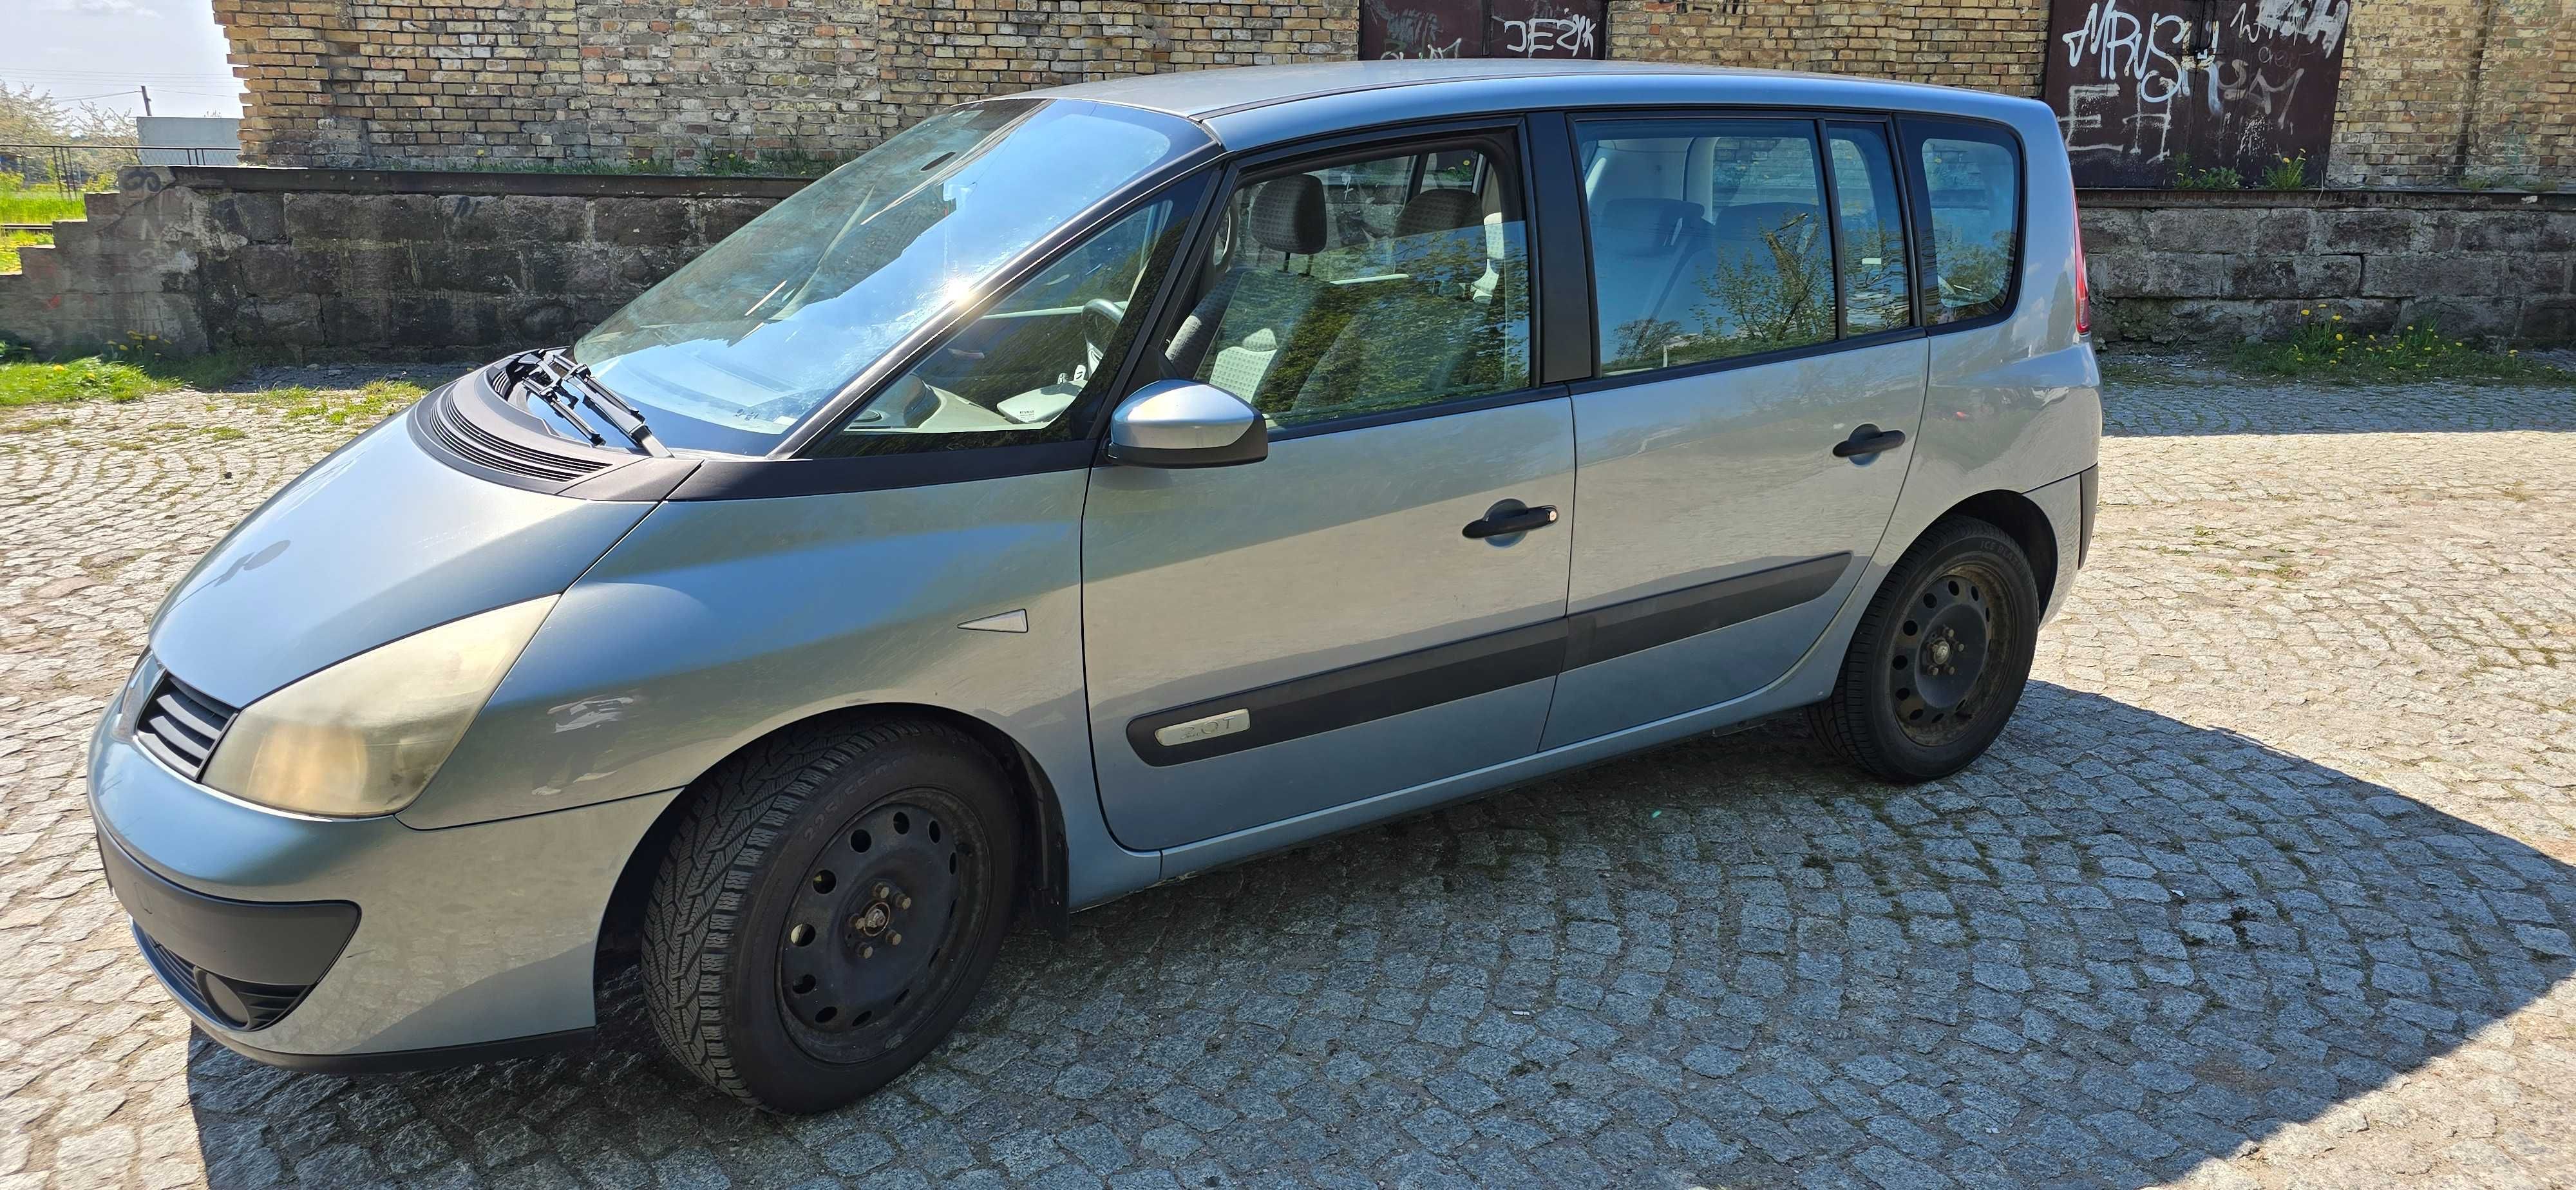 Renault Espace 2.0T Benzyna, 2003r.